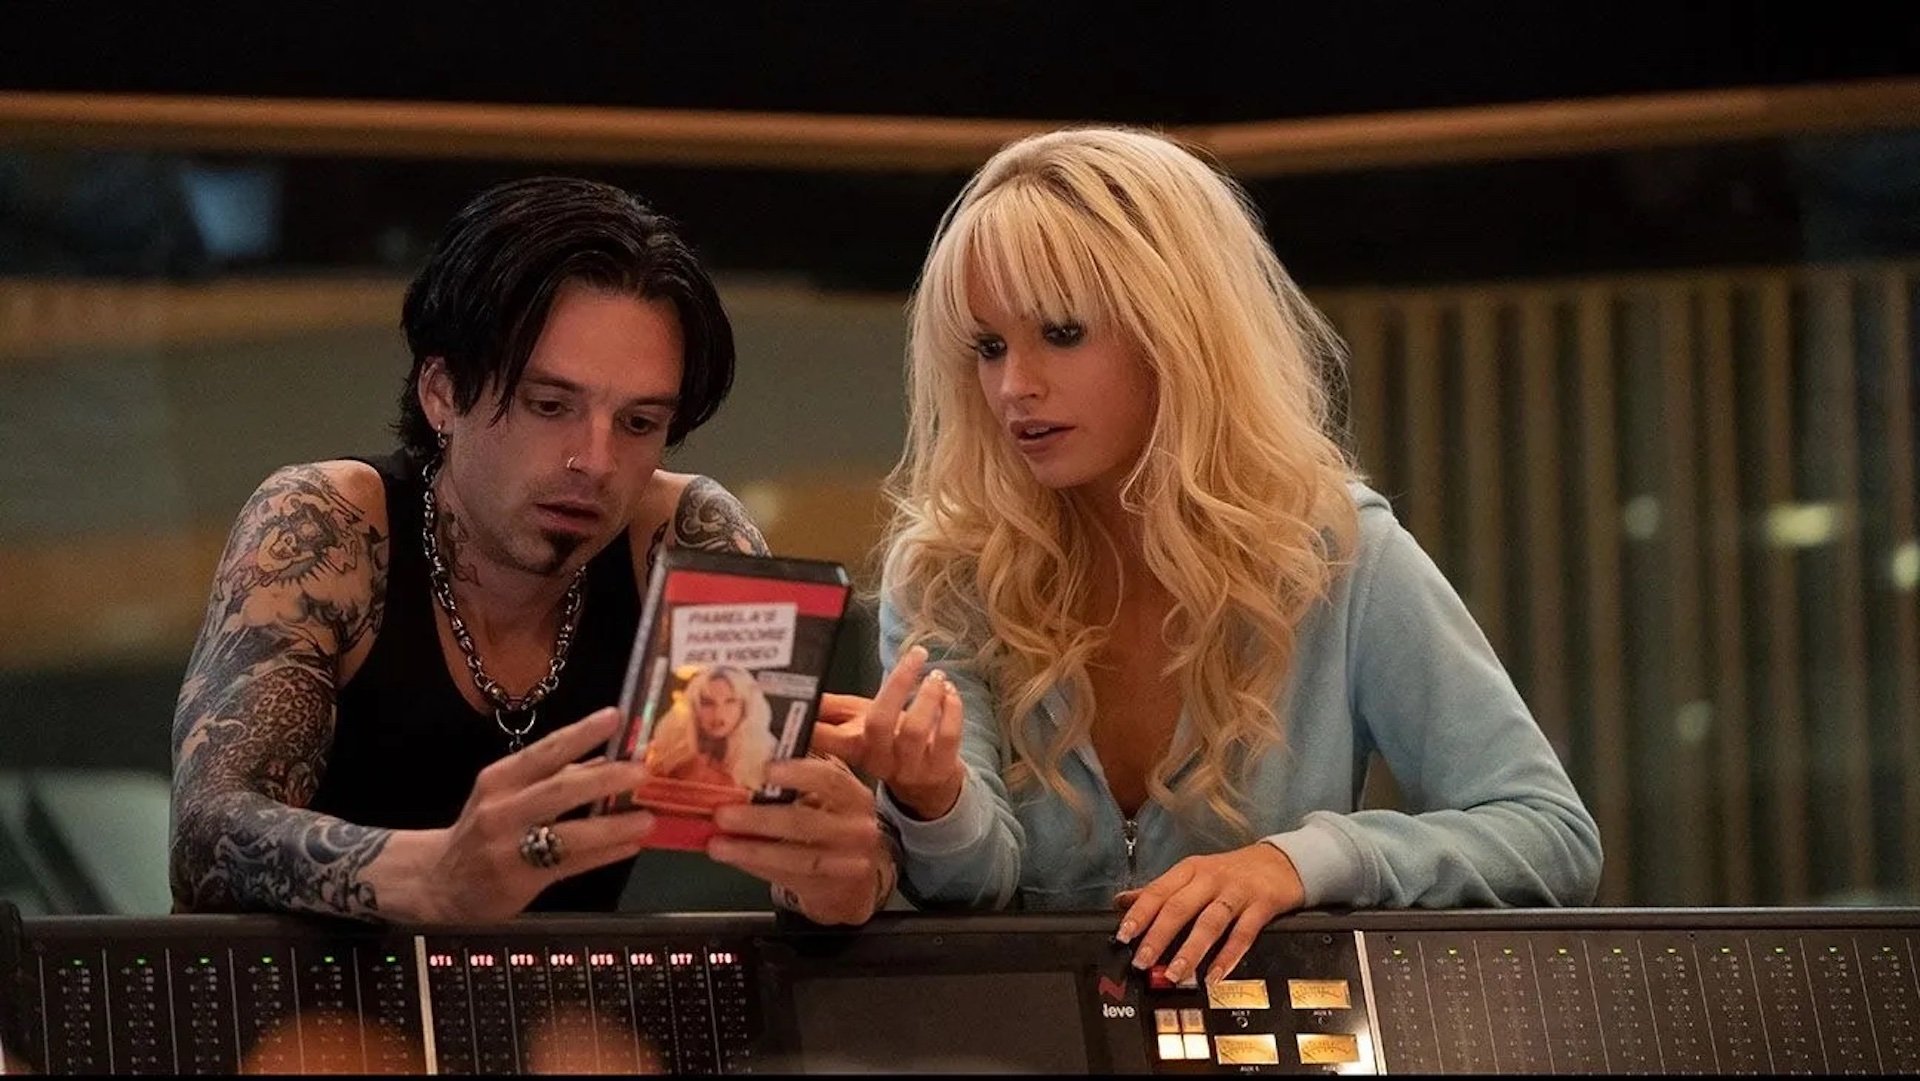 Pamela Anderson (Lily James) and Tommy Lee (Sebastian Stan) looking at a VHS in a music studio in 'Pam & Tommy,' 5 Ways To Write a Modern Biopic 